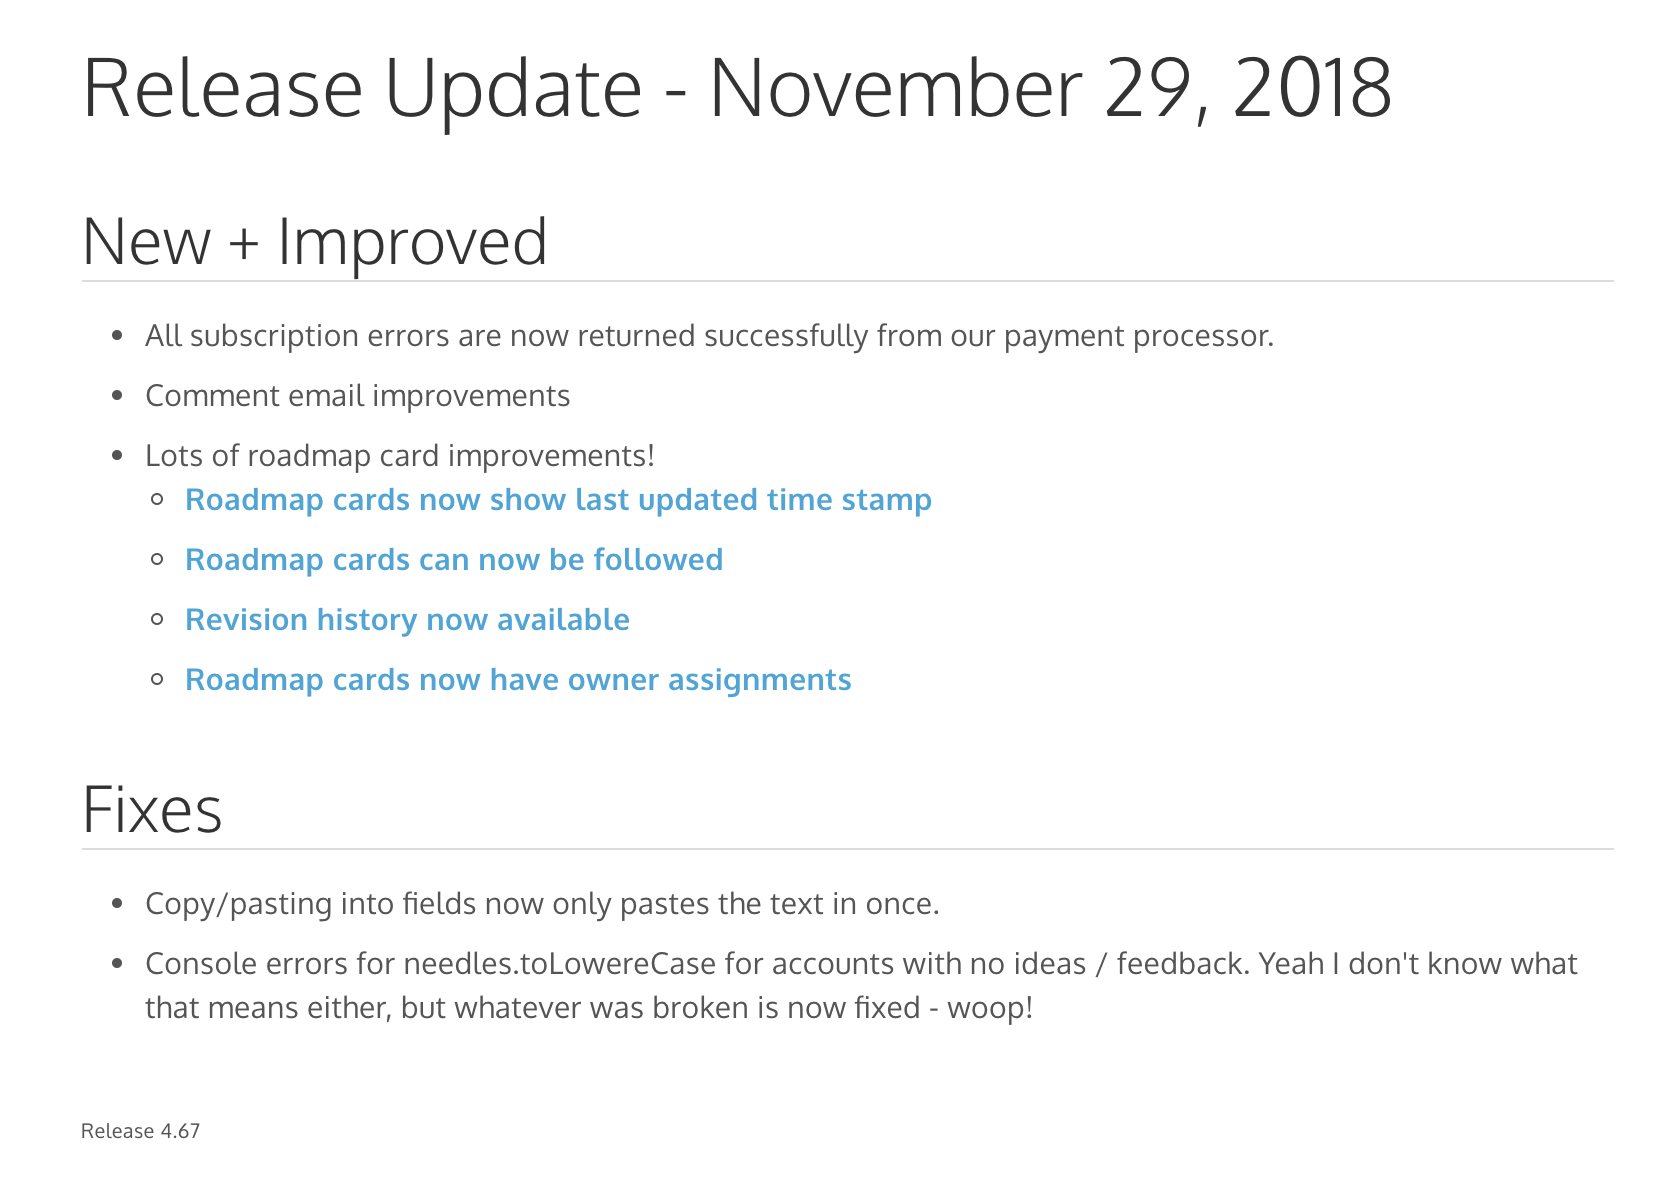 How To Write Great Release Notes | Prodpad Pertaining To Software Release Notes Template Word